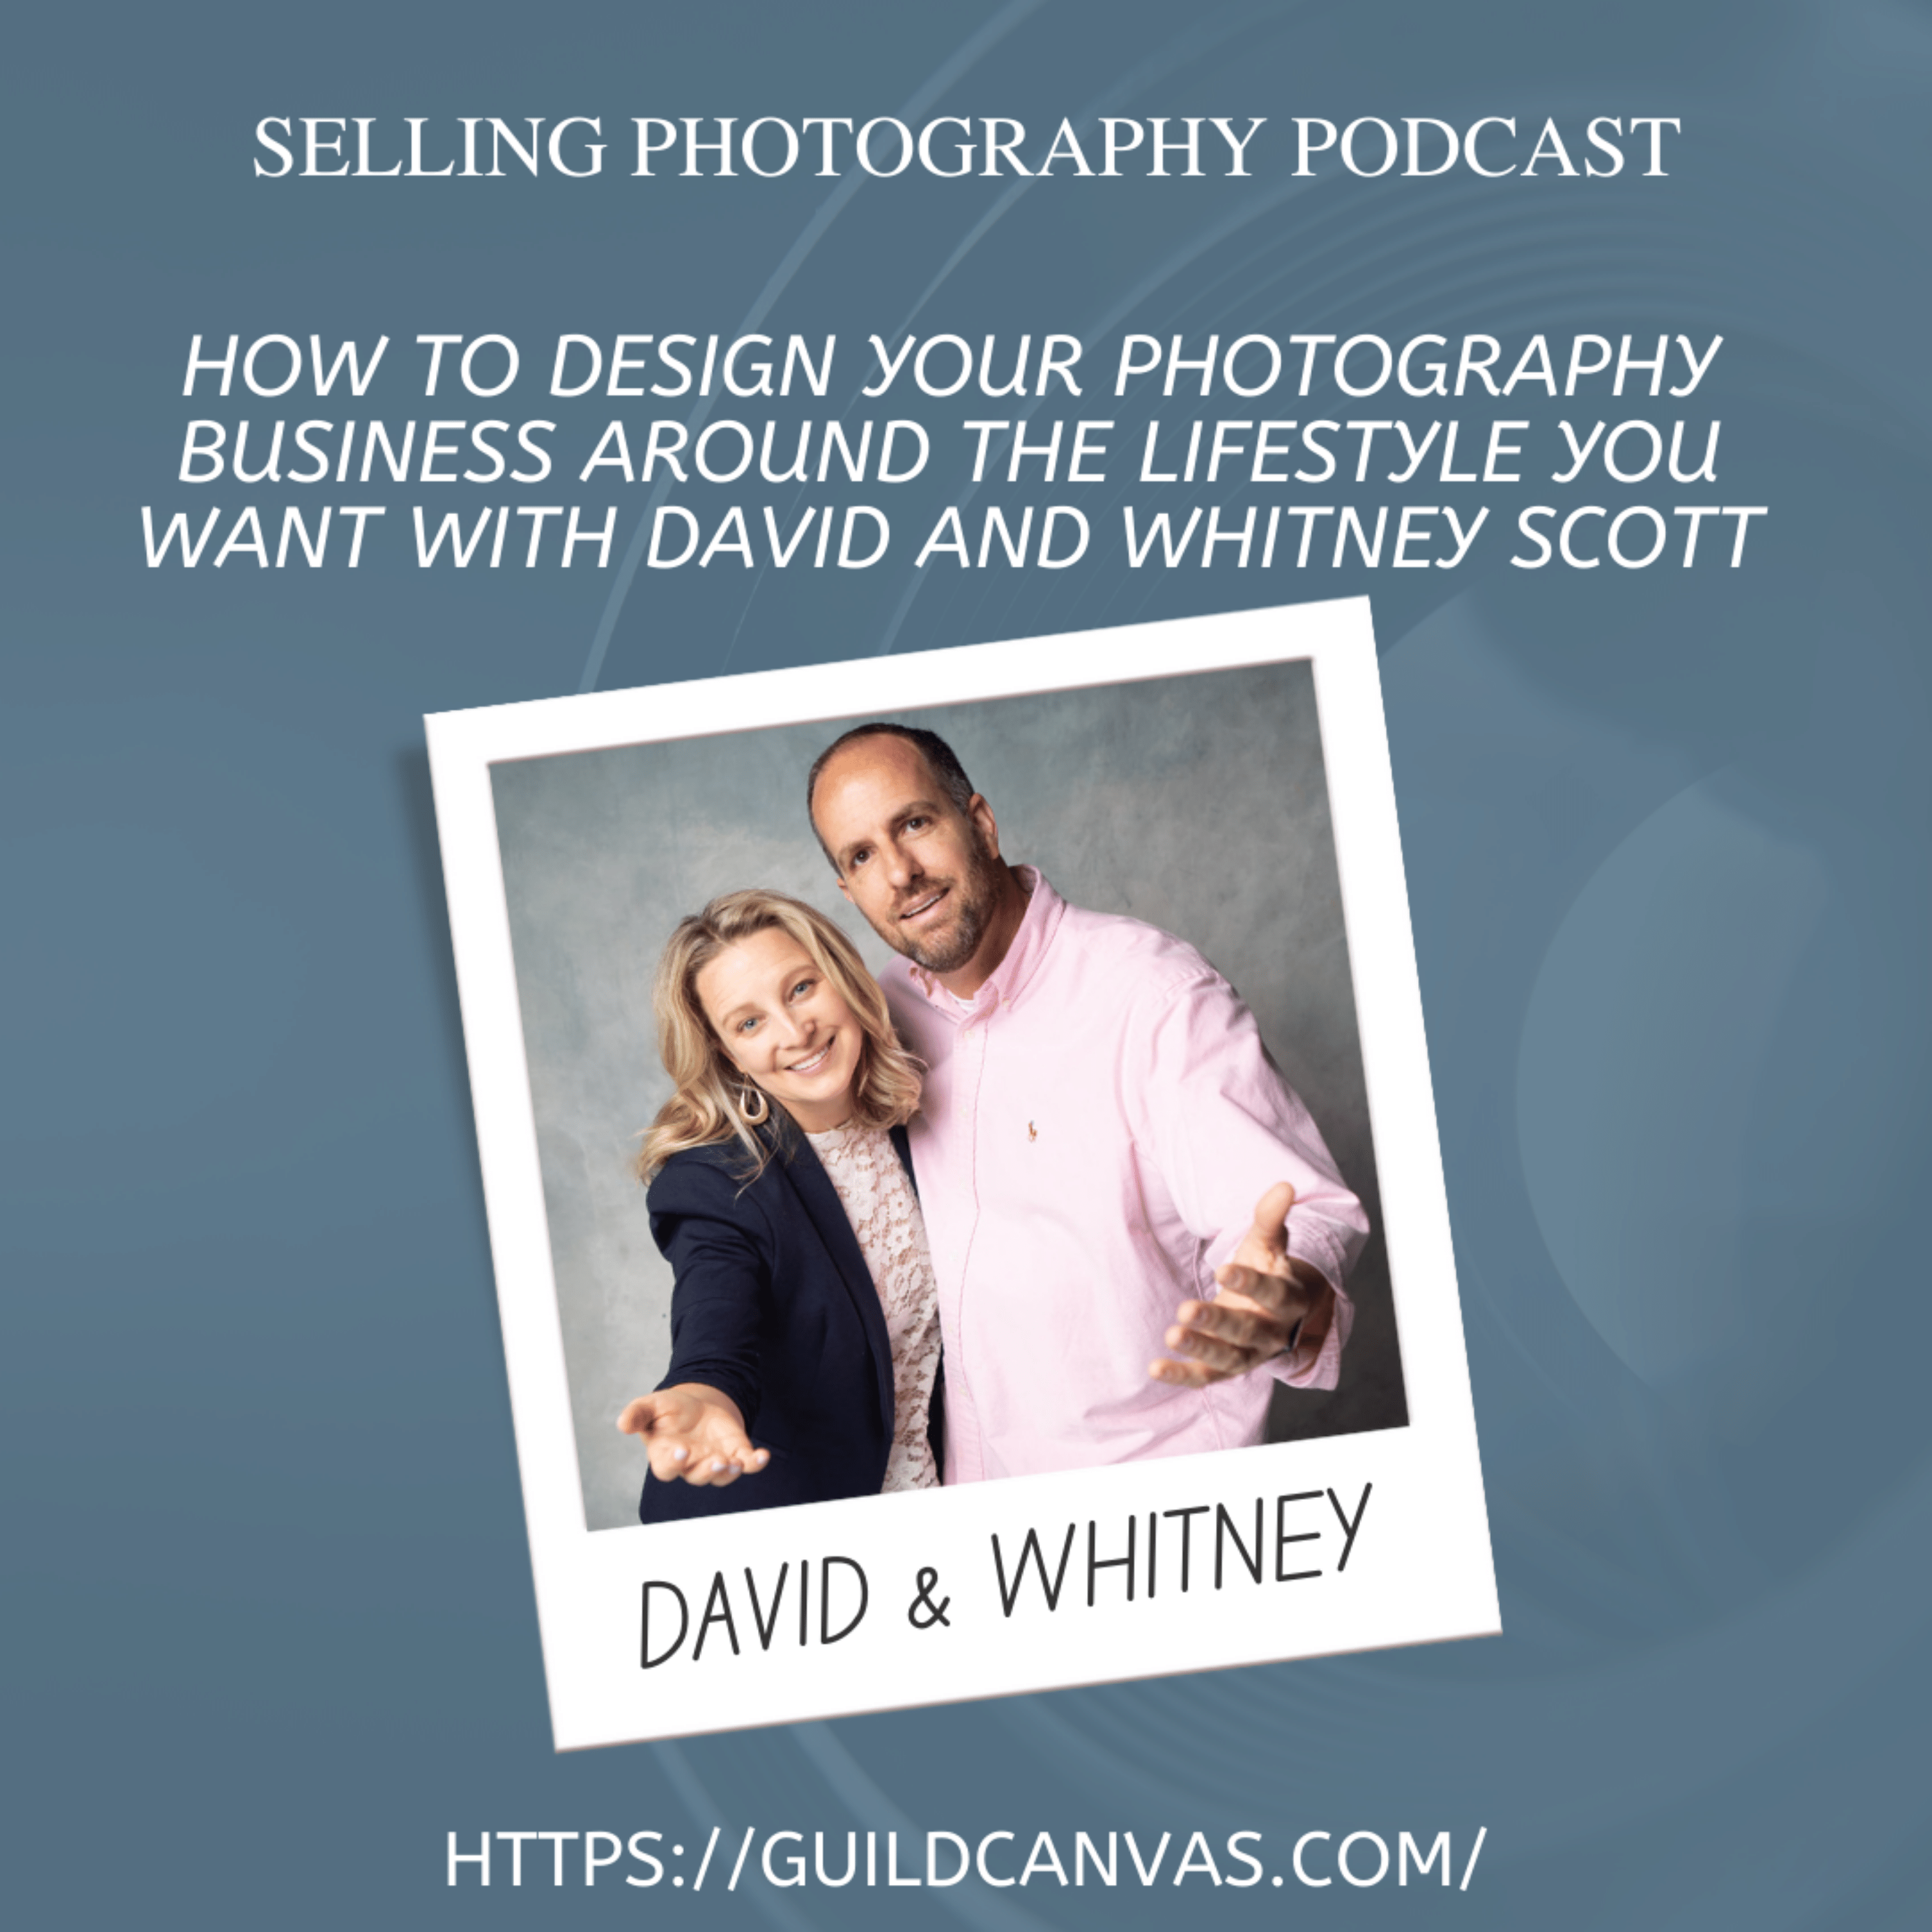 How to Design Your Photography Business Around The Lifestyle You Want With David And Whitney Scott